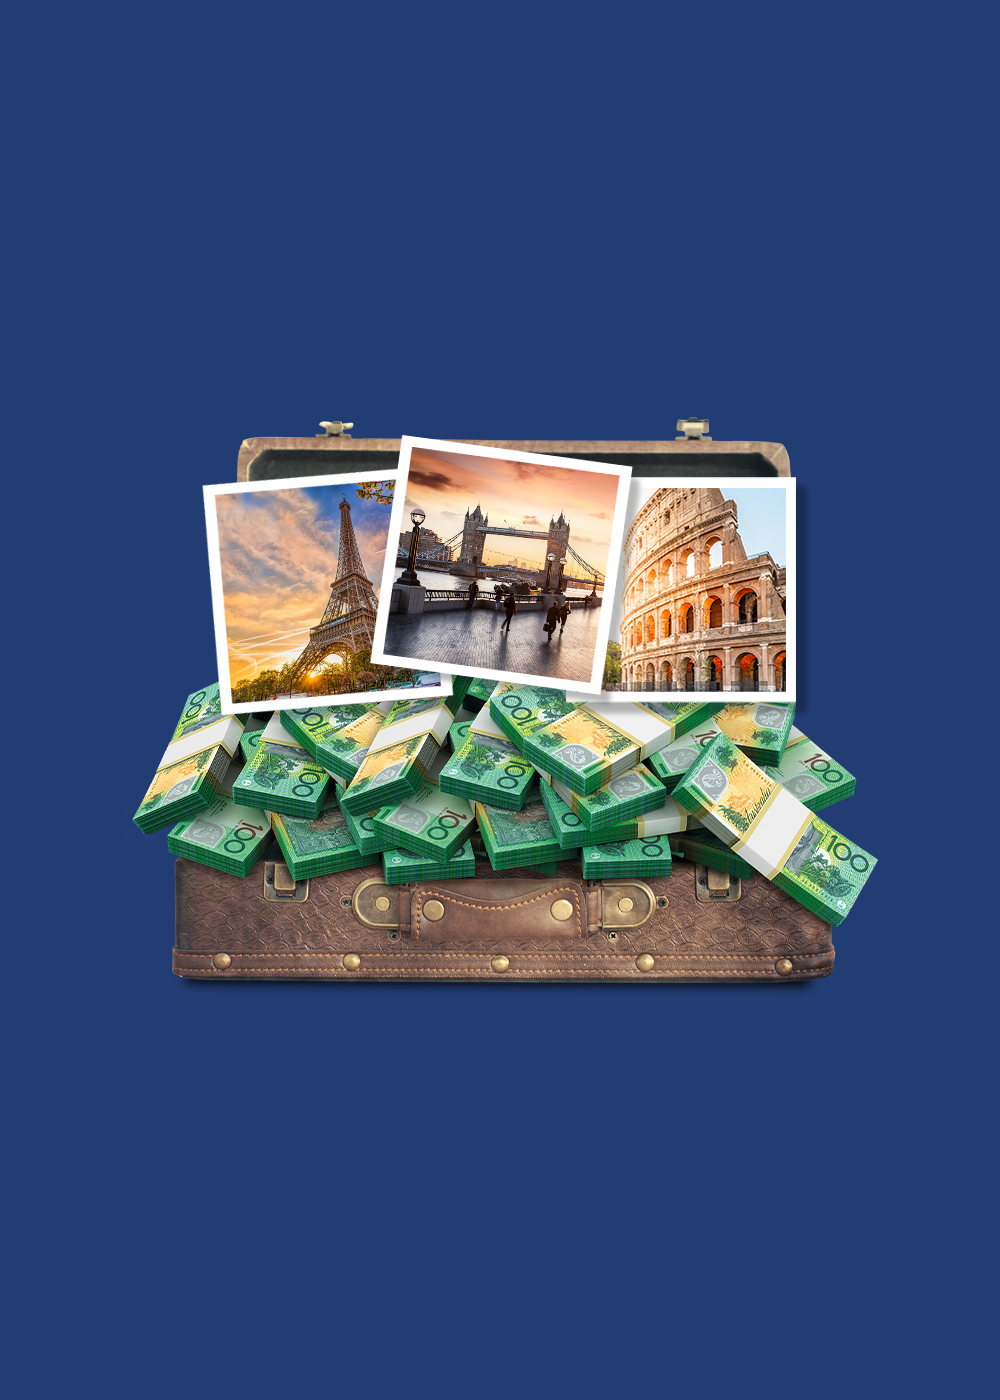 Collage of European holiday destinations: Paris, Rome and UK at dusk with suitcase and cash on blue background